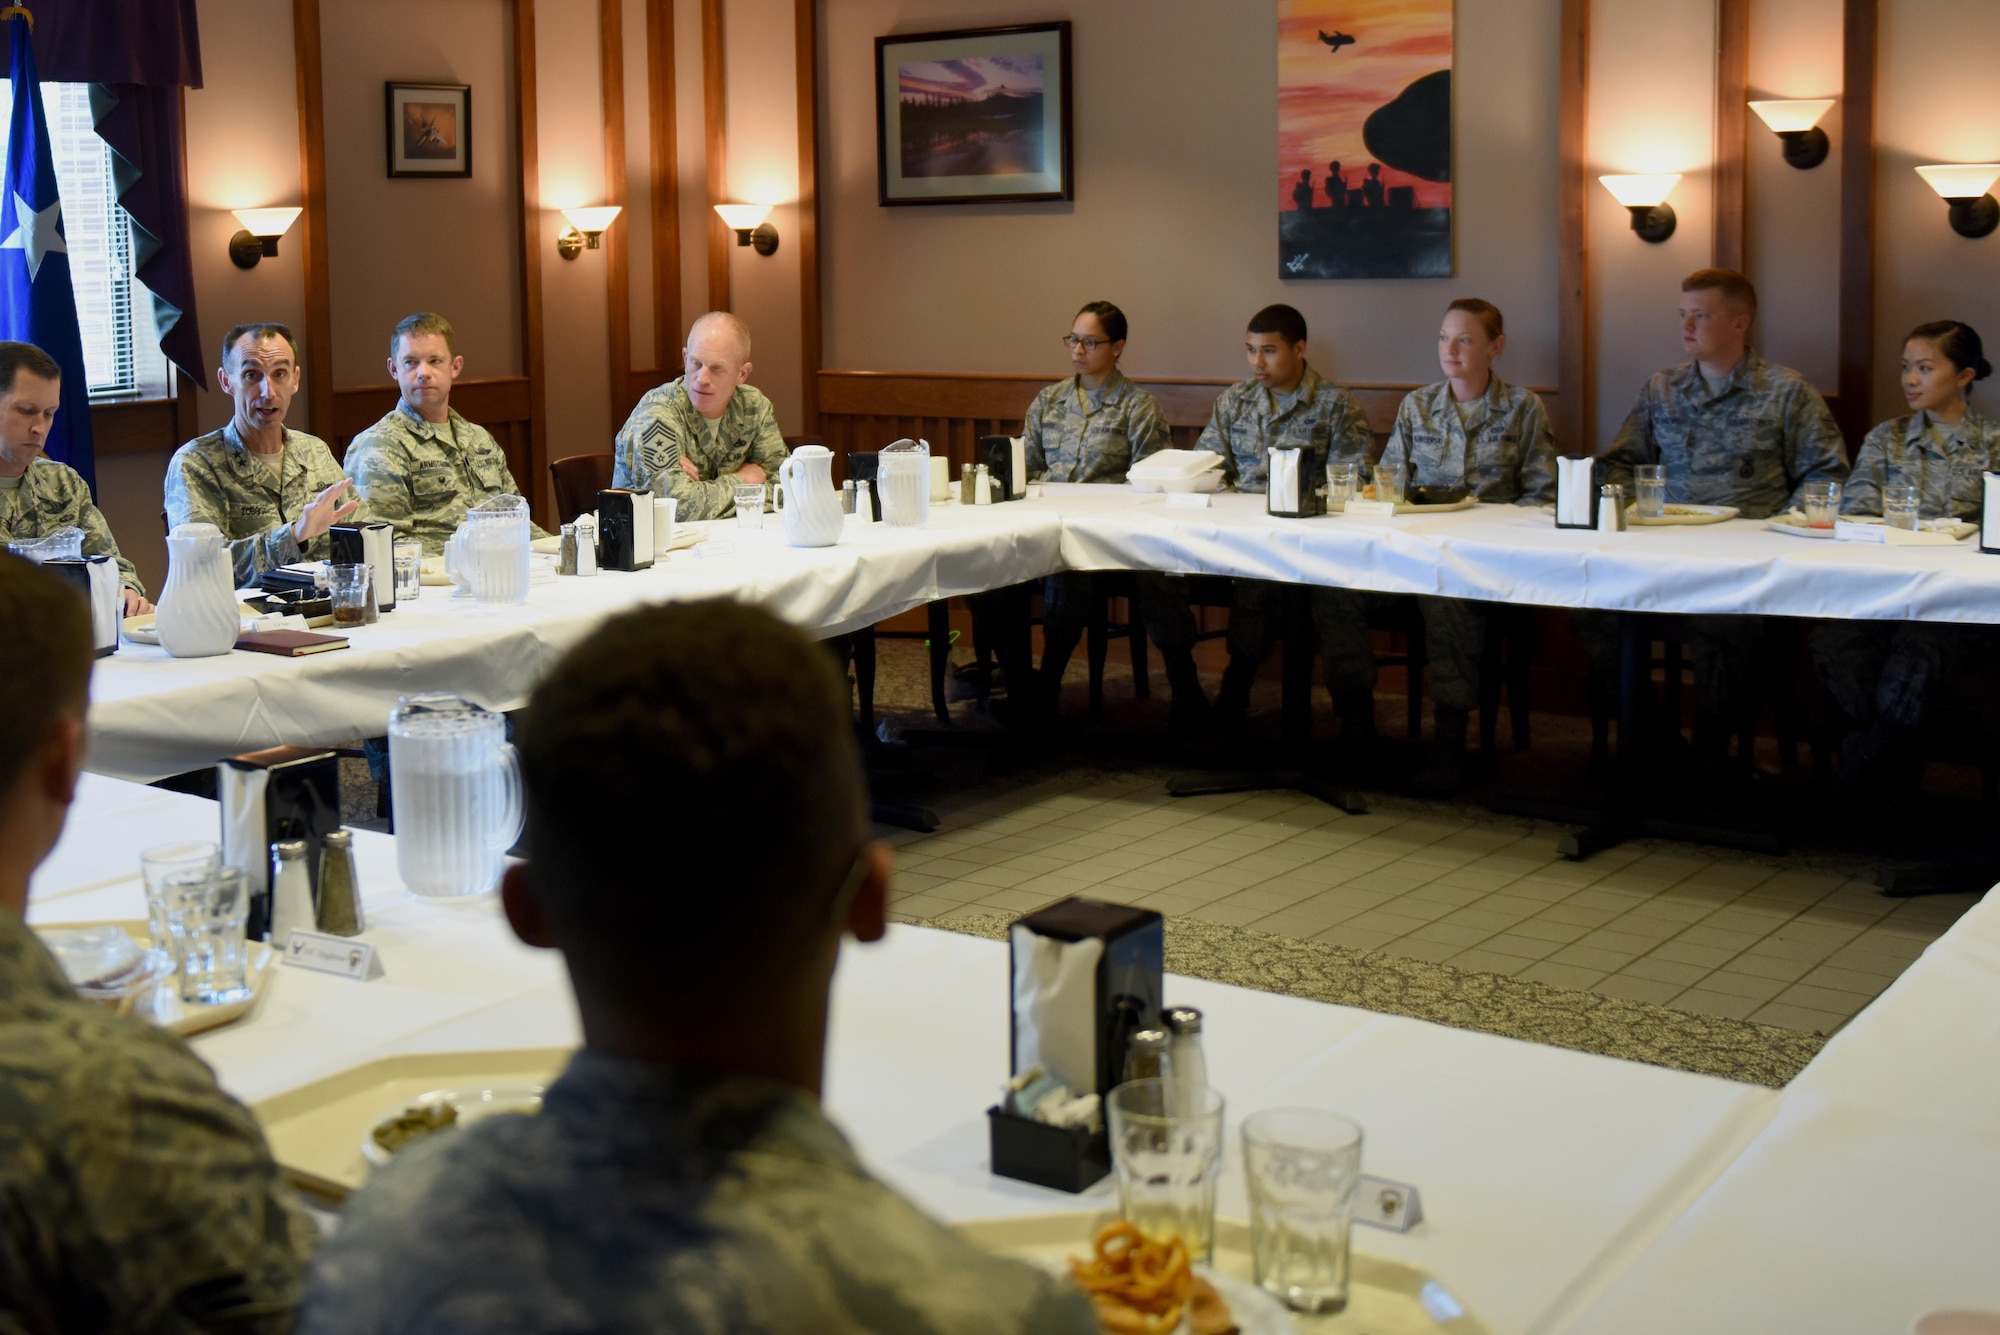 Maj. Gen. Scott Zobrist, Ninth Air Force commander, dines with dorm Airmen during a tour, Aug. 23, 2016, at Seymour Johnson Air Force Base, North Carolina. Zobrist and Team Seymour leadership, spoke with Airmen about what inspired them to join the Air Force. (U.S. Air Force photo by Airman 1st Class Ashley Williamson)